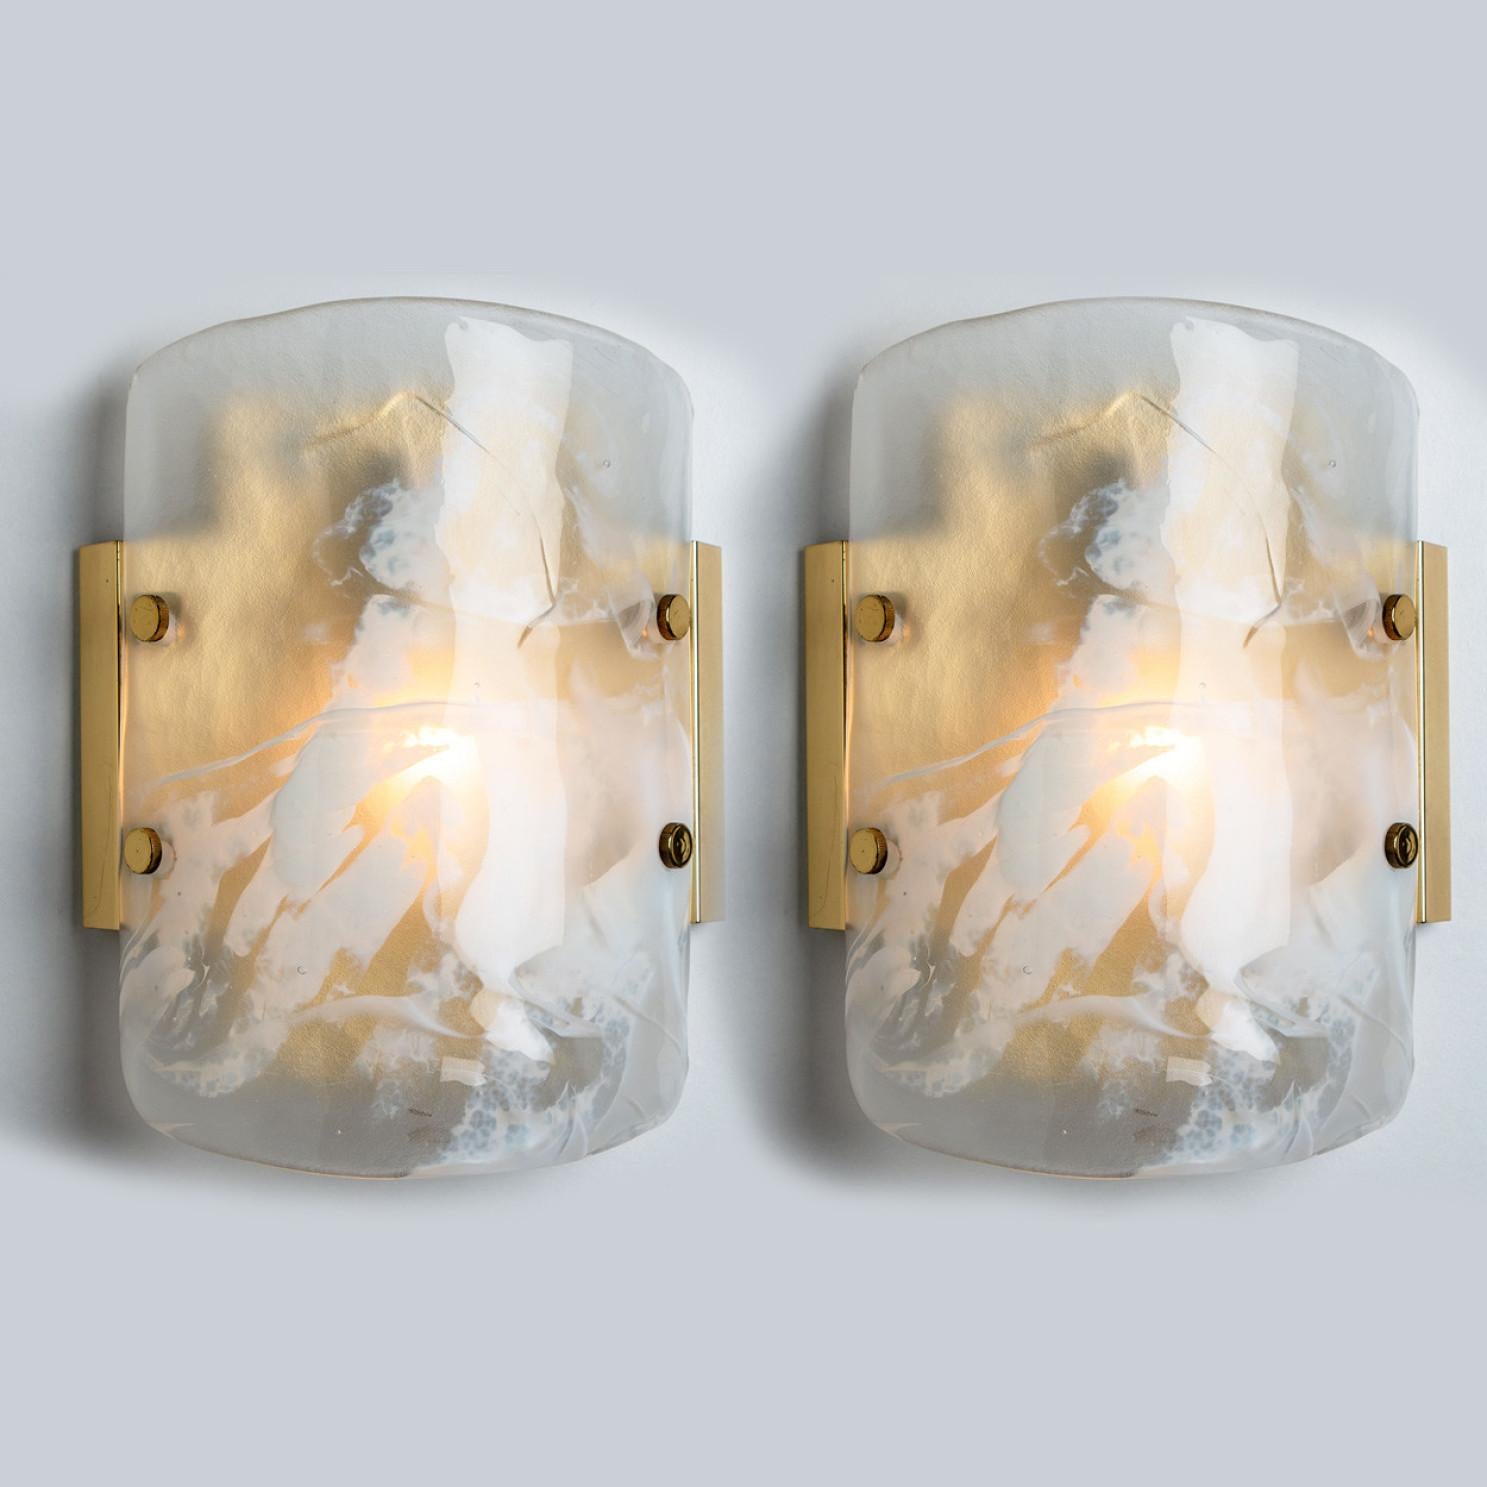 Mid-20th Century Hillebrand Marble Murano Glass Wall Light Fixtures, 1960s For Sale